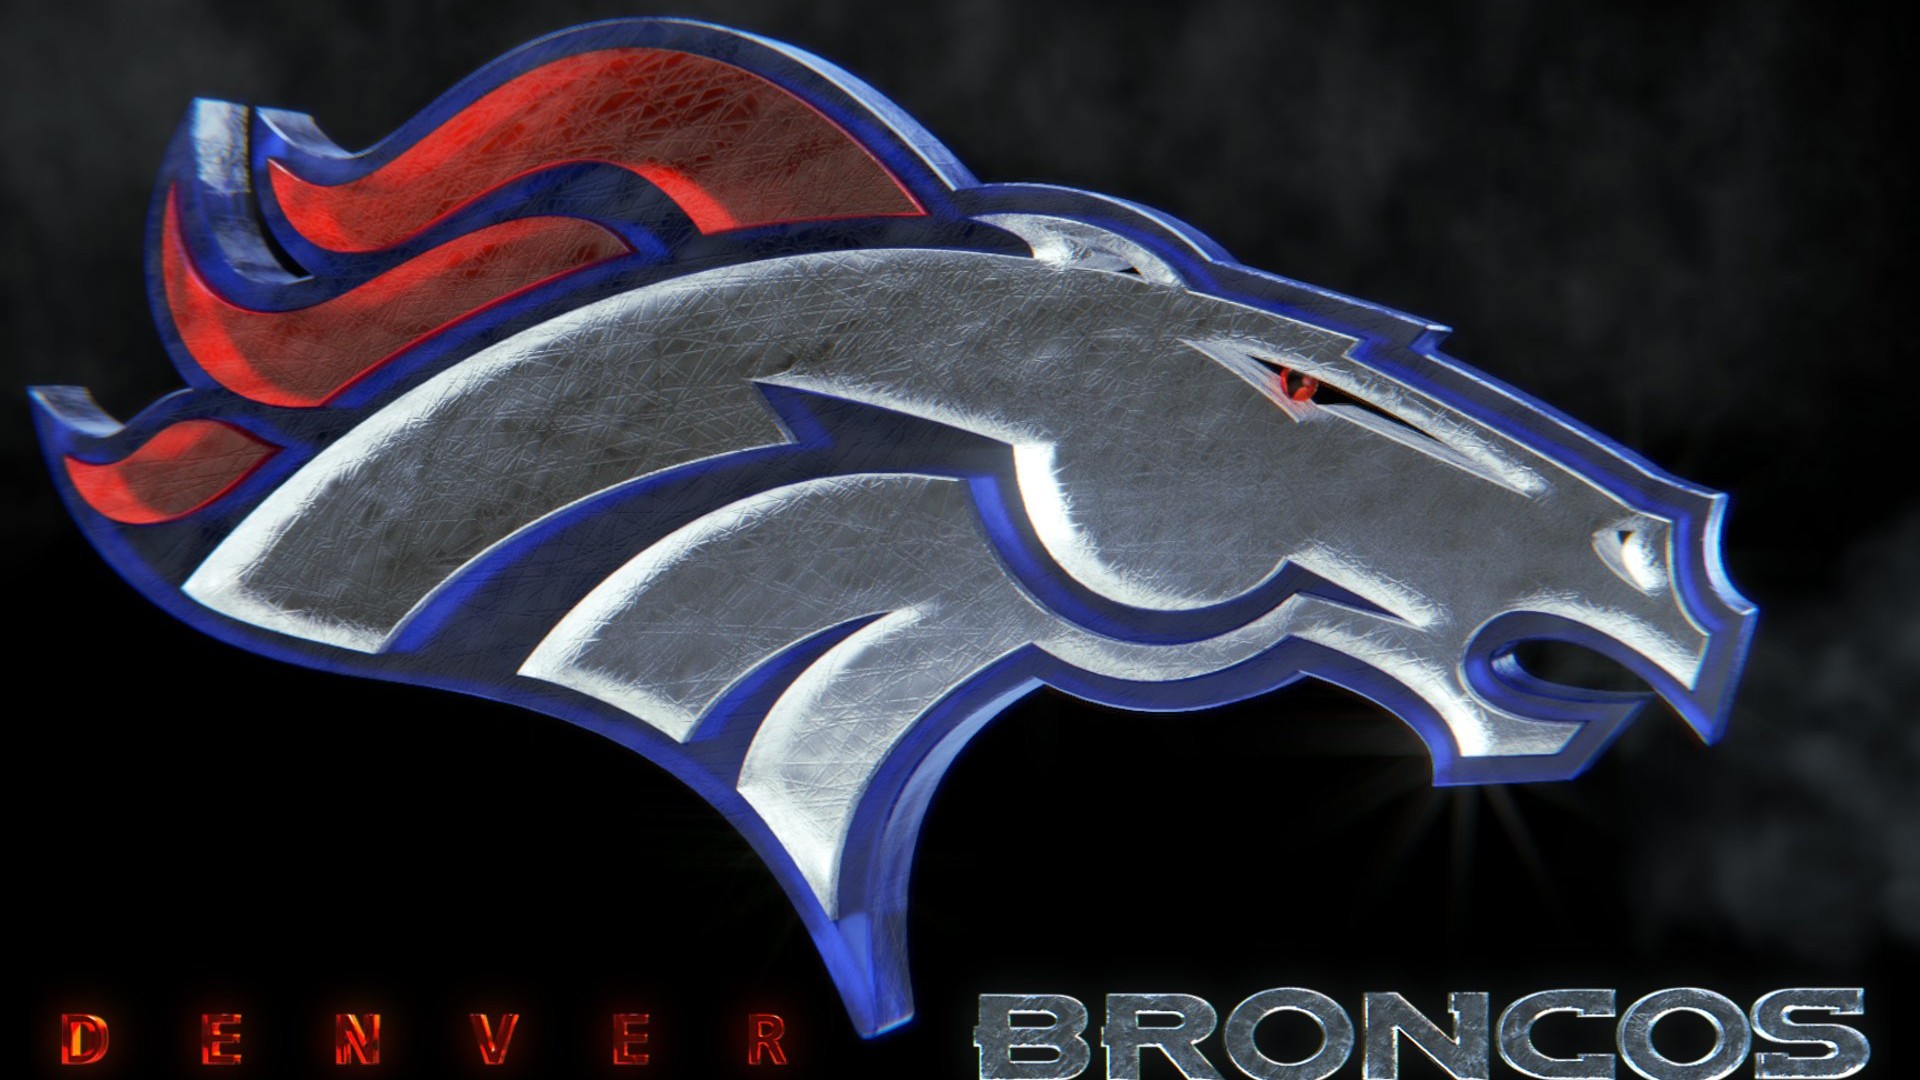 Denver Broncos Wallpaper for Computer with high-resolution 1920x1080 pixel. Download and set as wallpaper for Desktop Computer, Apple iPhone X, XS Max, XR, 8, 7, 6, SE, iPad, Android